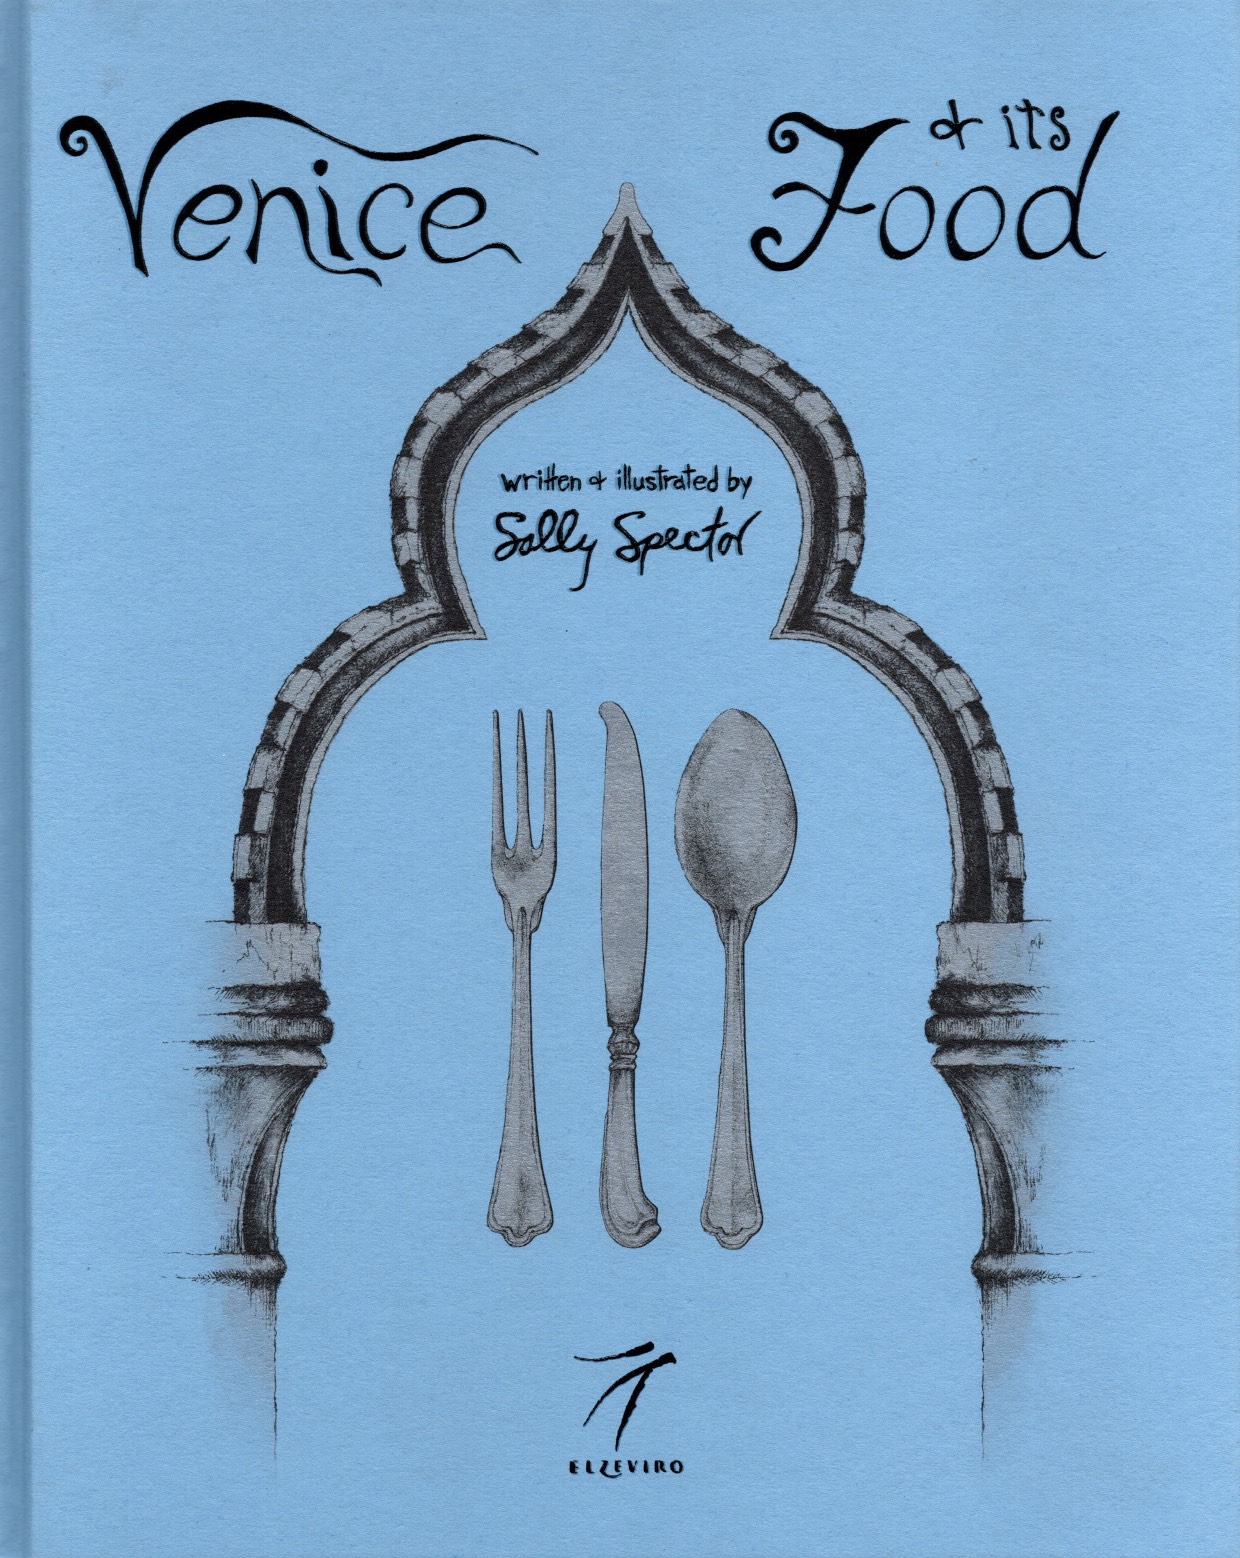 Venice and food